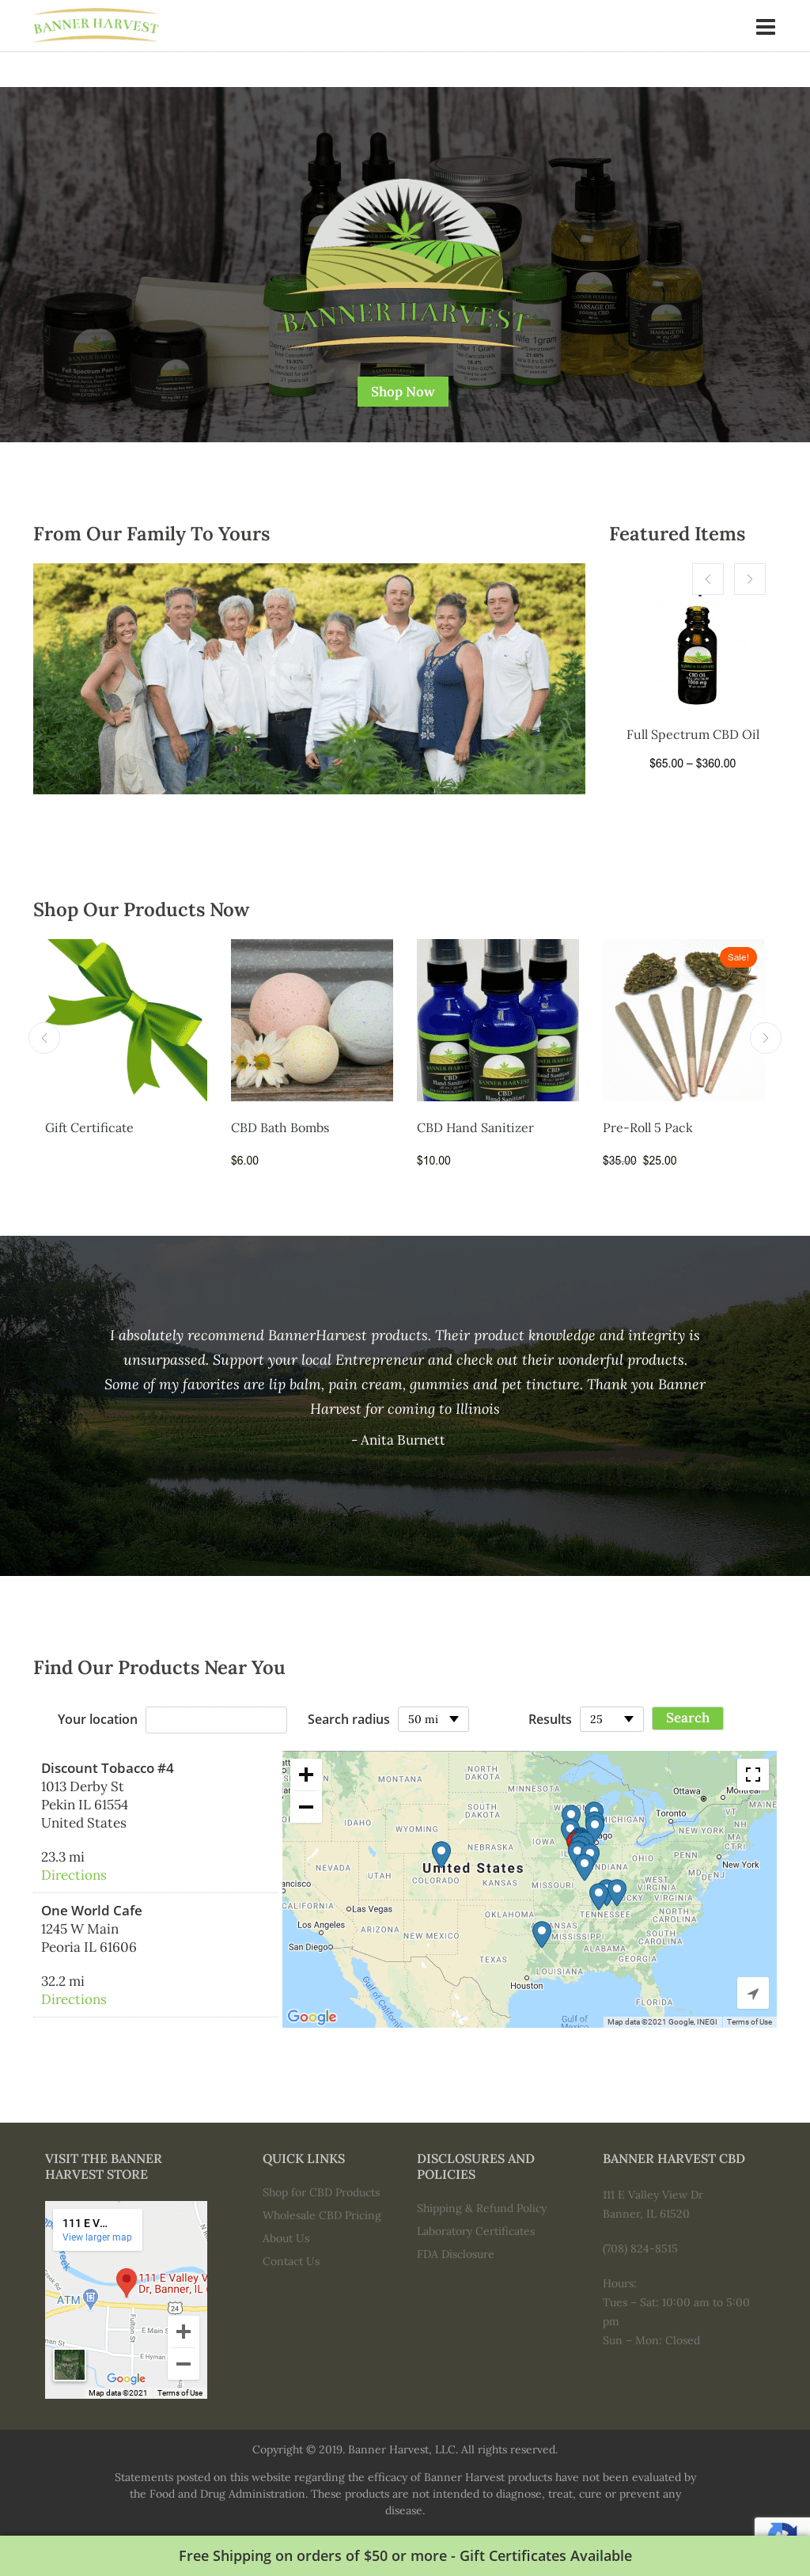 Banner Harvest Farm and CBD products.